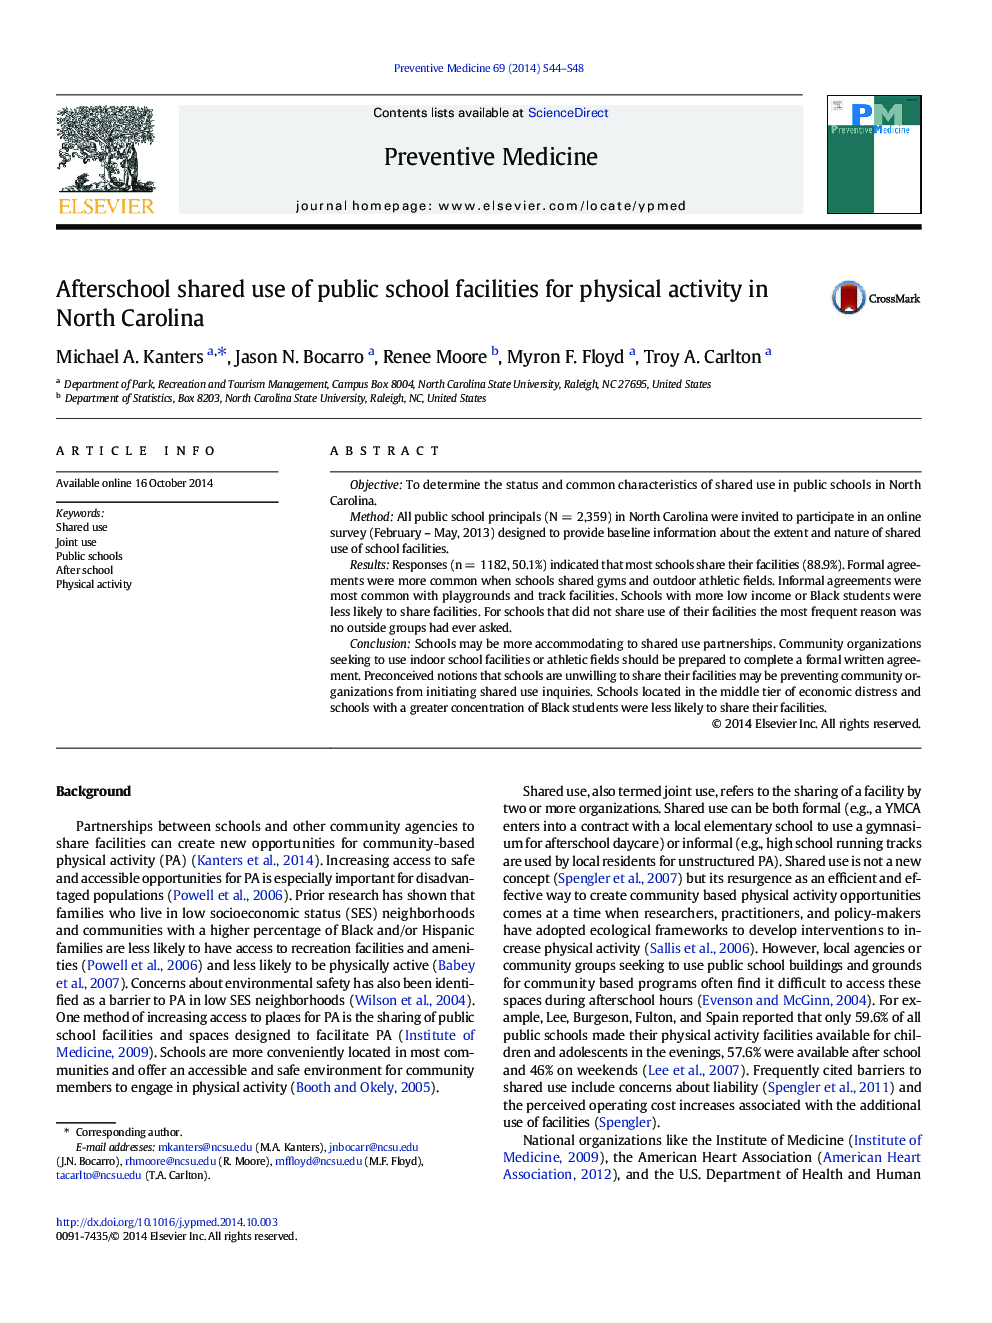 Afterschool shared use of public school facilities for physical activity in North Carolina